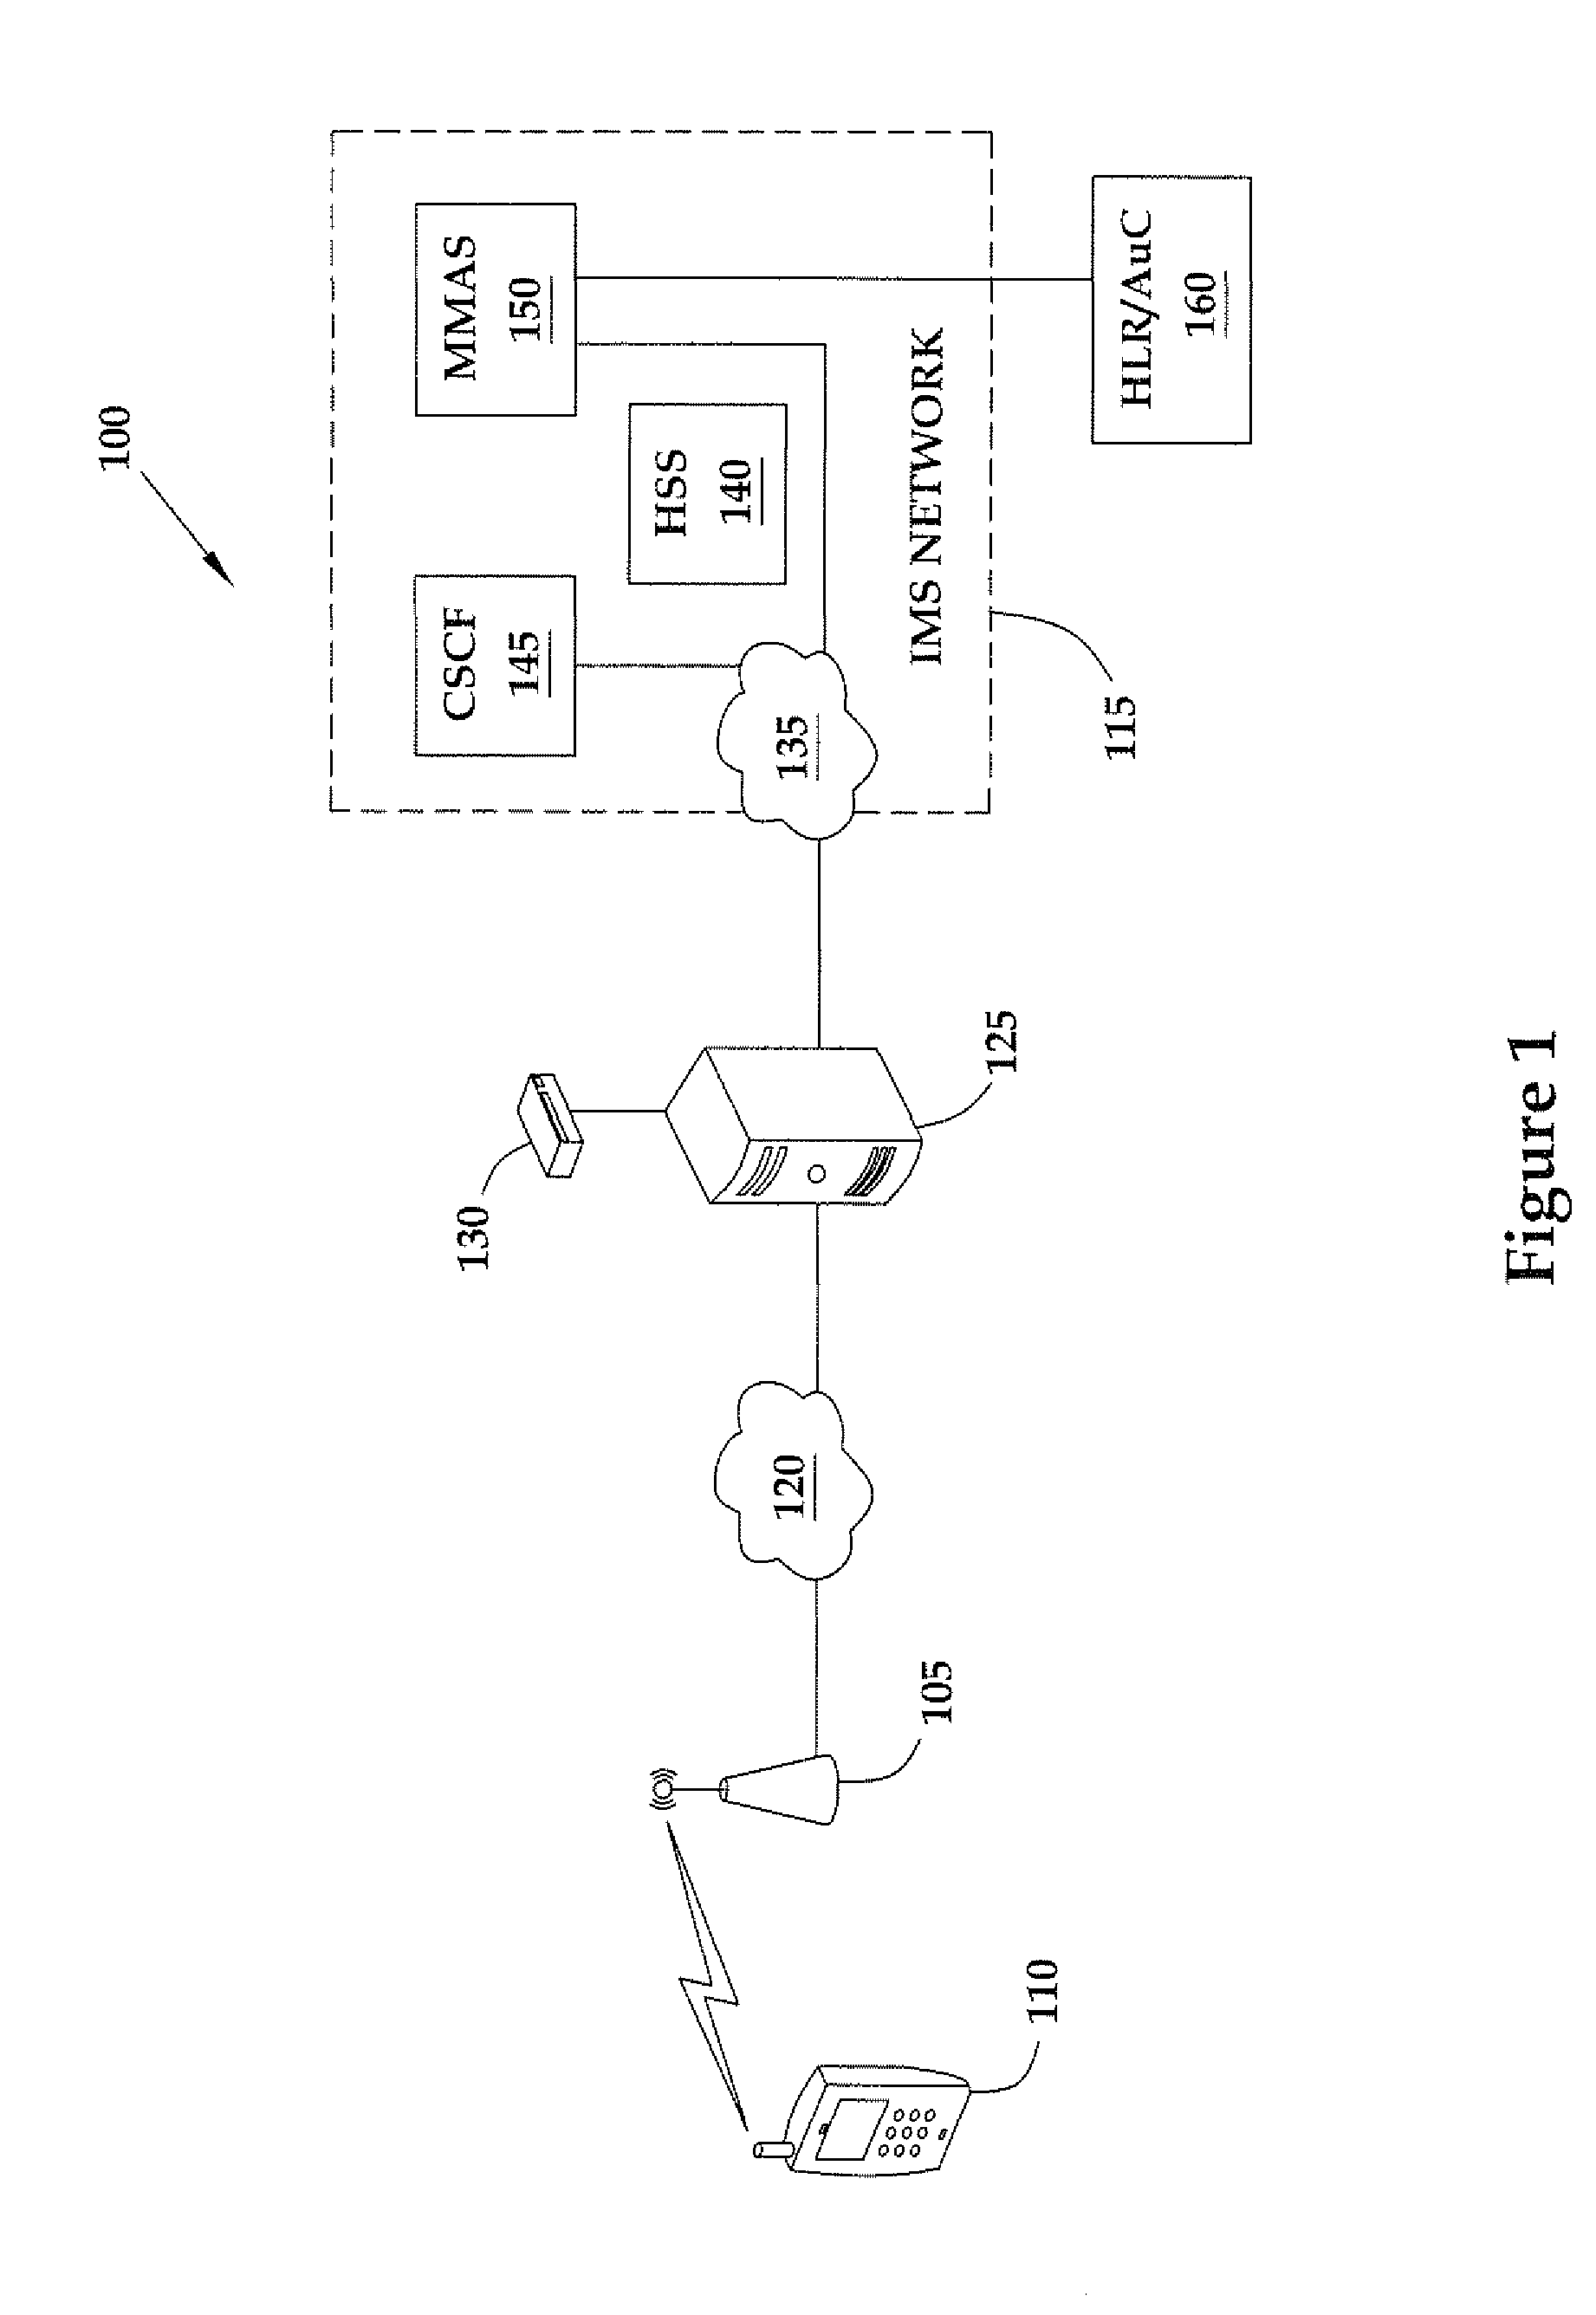 Method for authenticating a mobile unit attached to a femtocell that operates according to code division multiple access